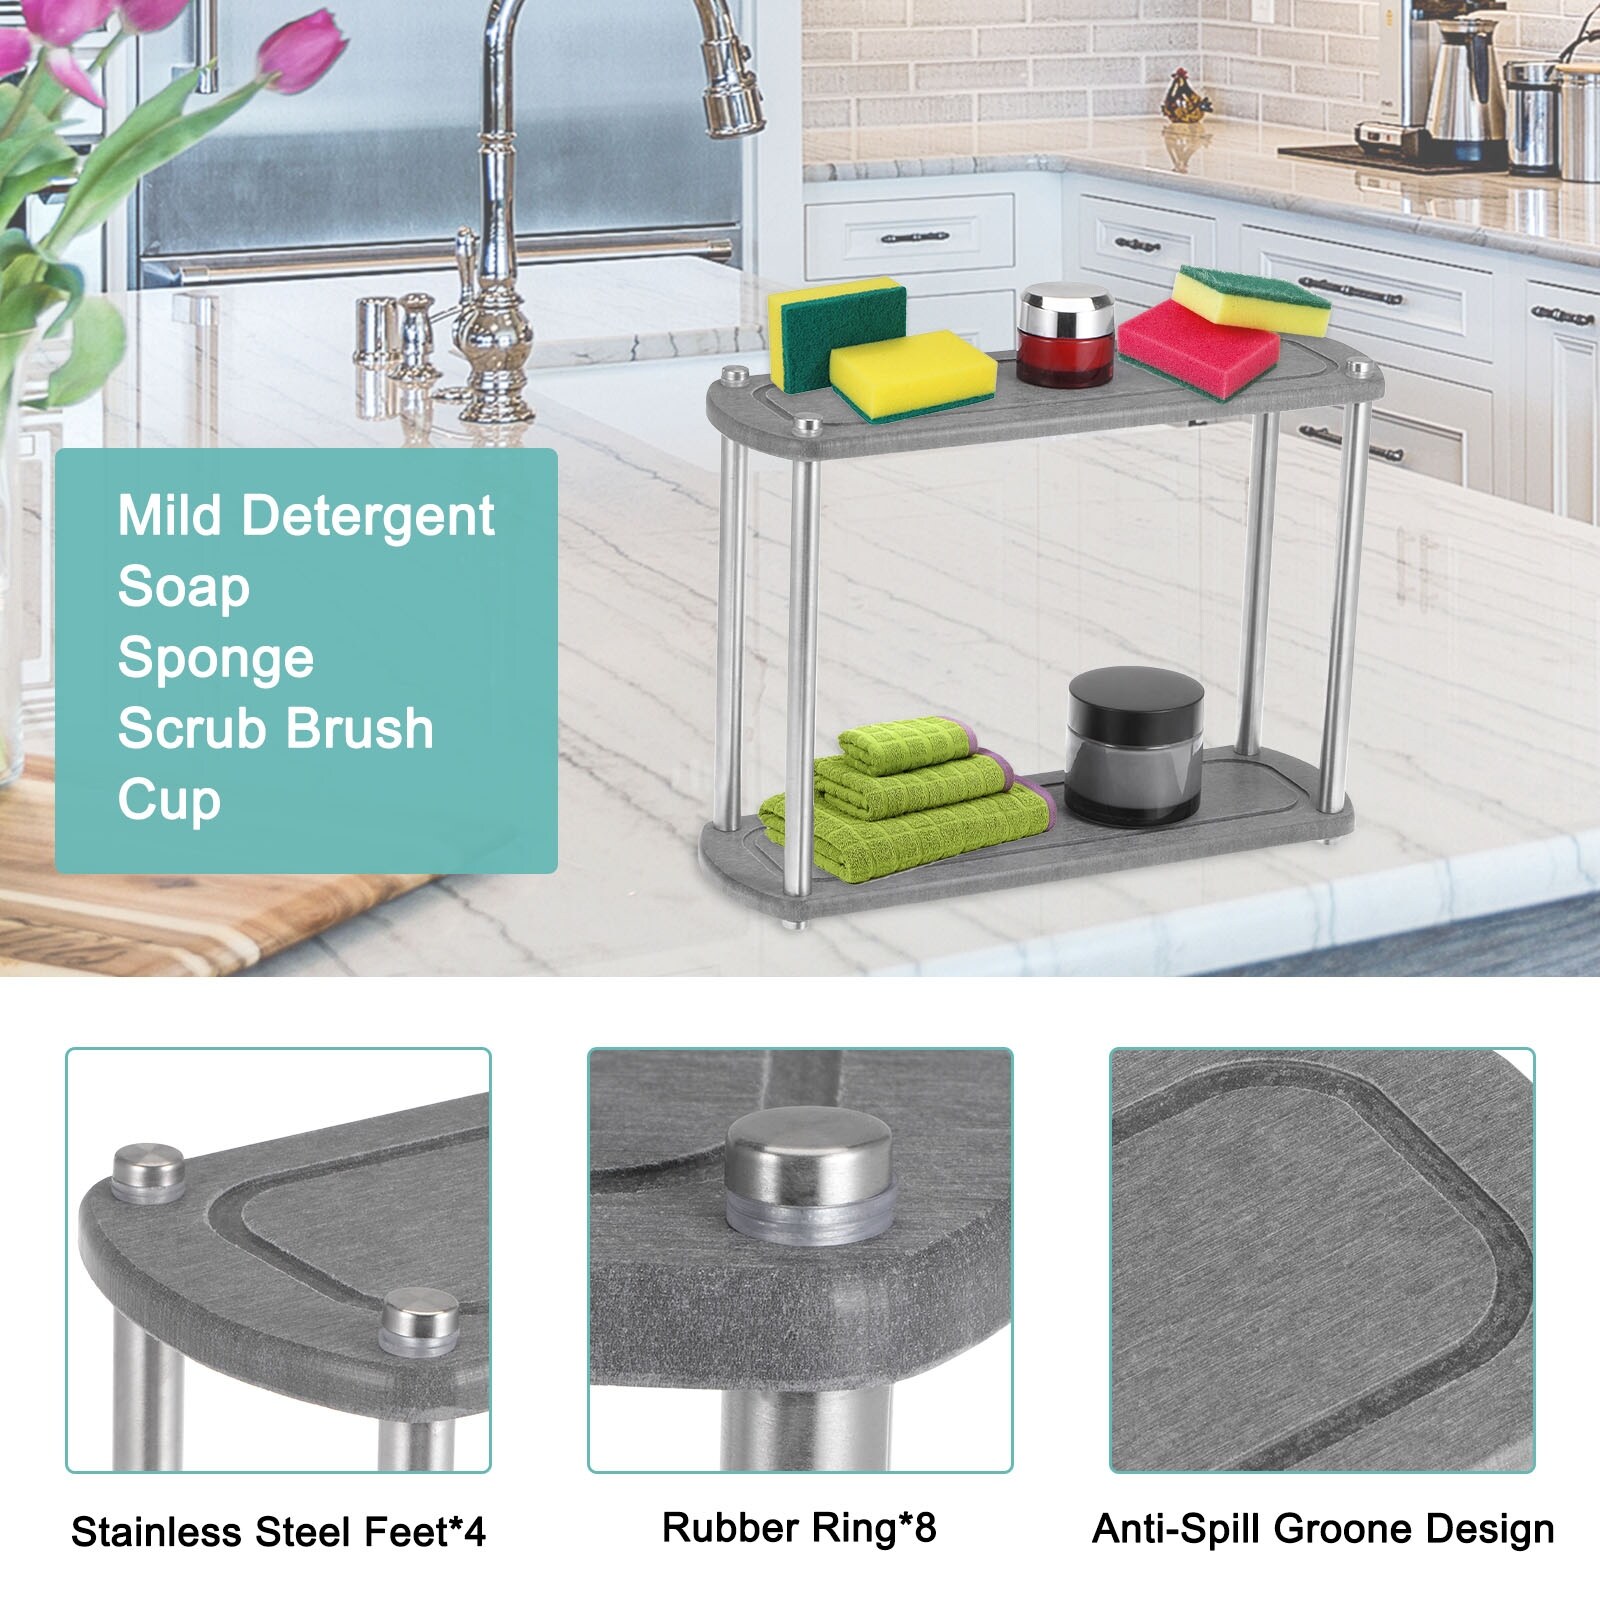 Instant Dry Sink Caddy Organizer for Kitchen and Bathroom, Fast Drying Rack